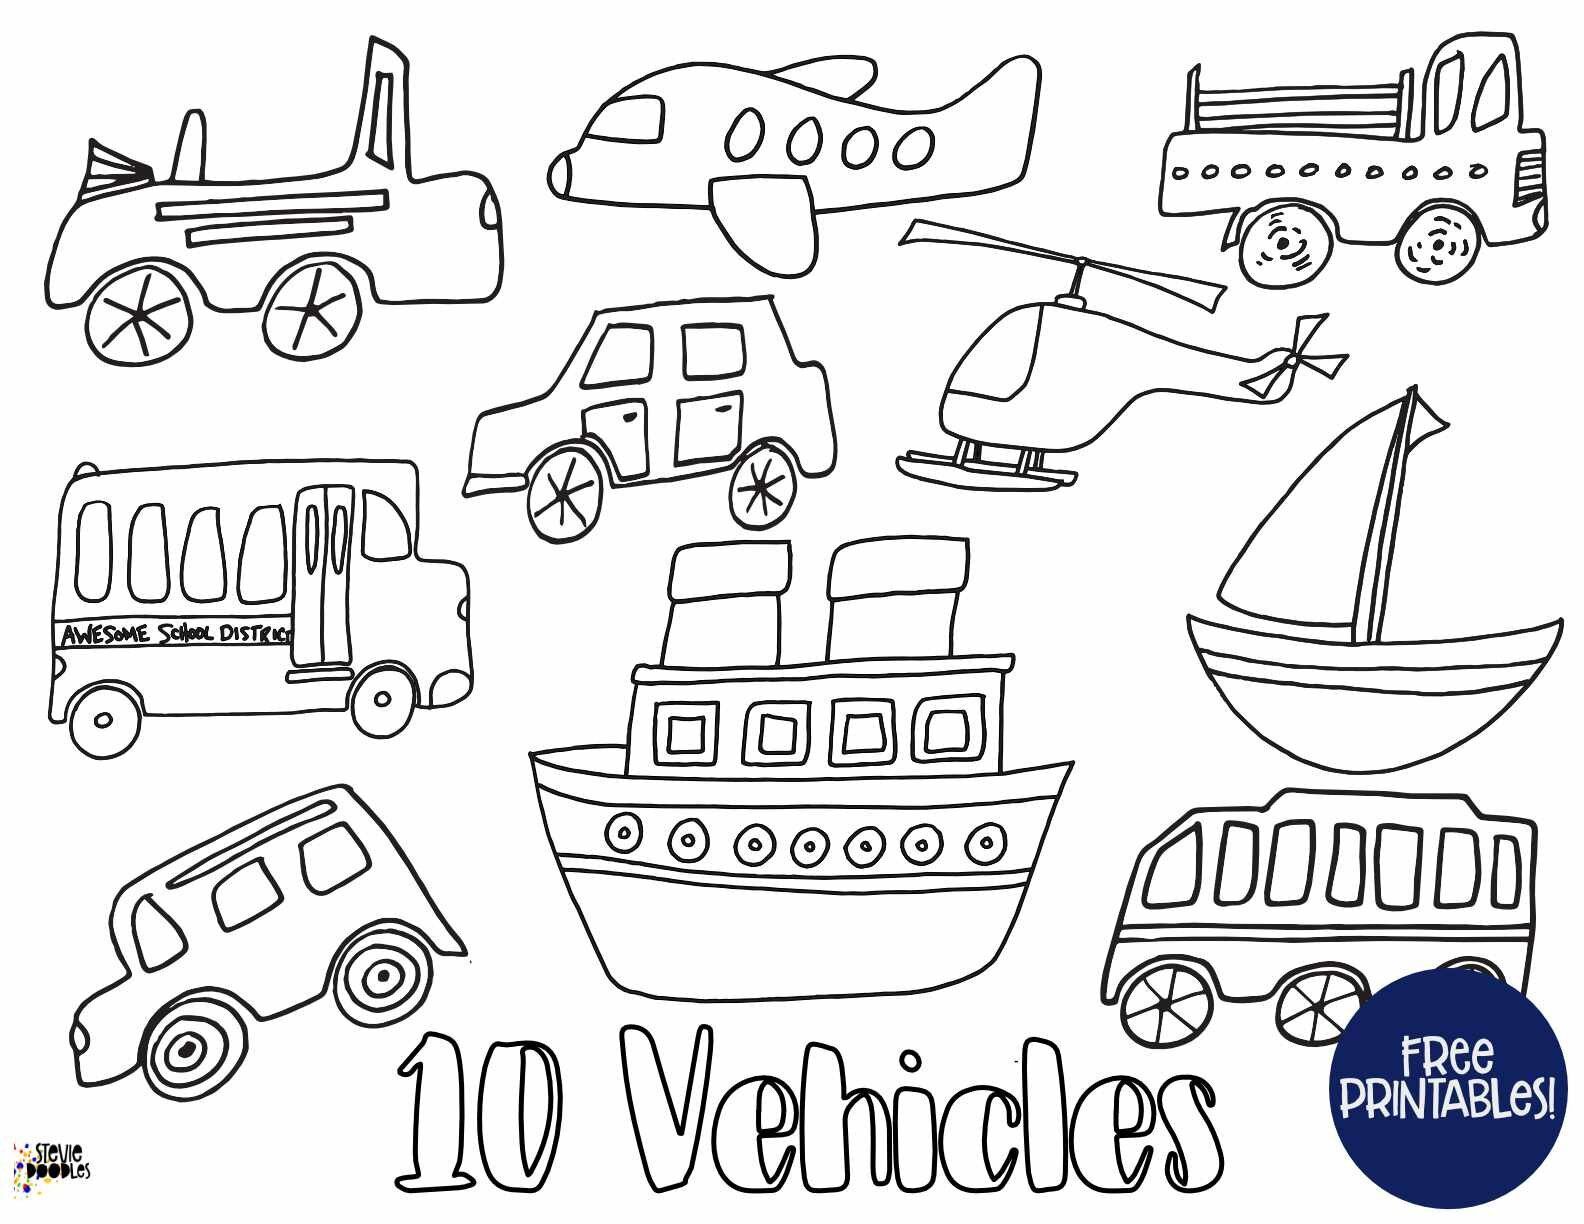 Coloring Pages Vehicles - Kid Creative